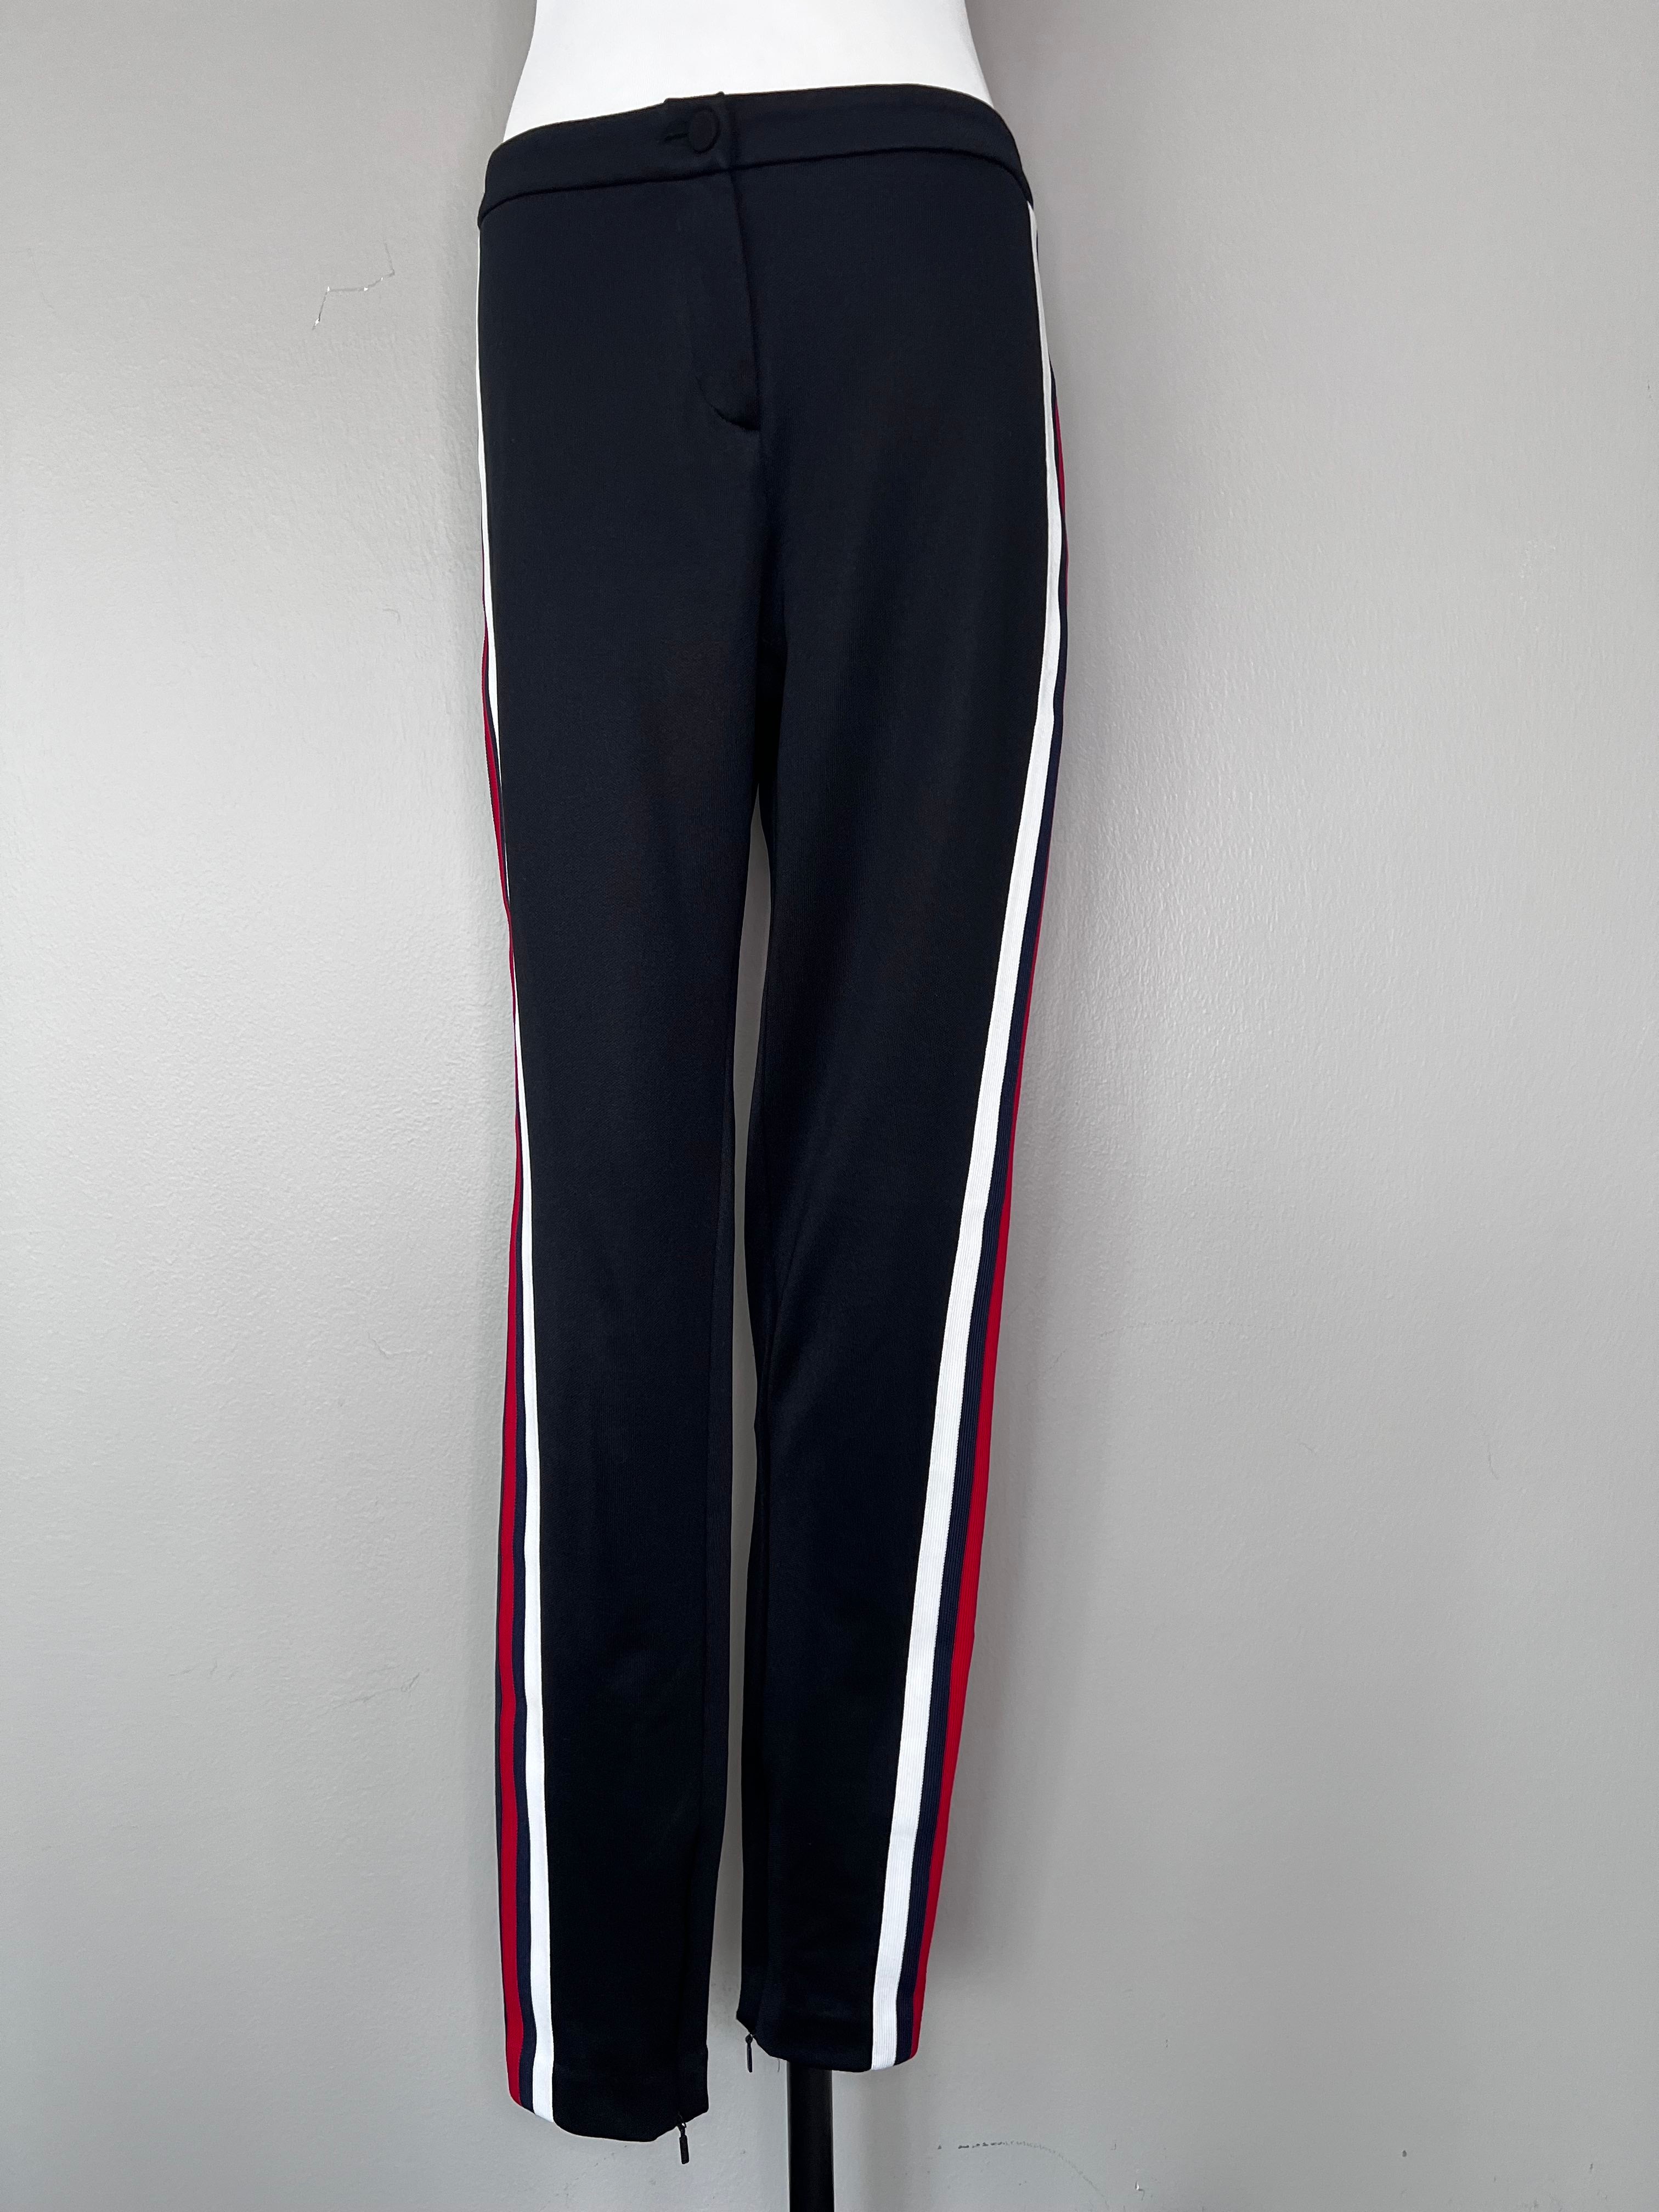 Black straight leg Guccci joggers with red, blue, and white stripes on the sides.